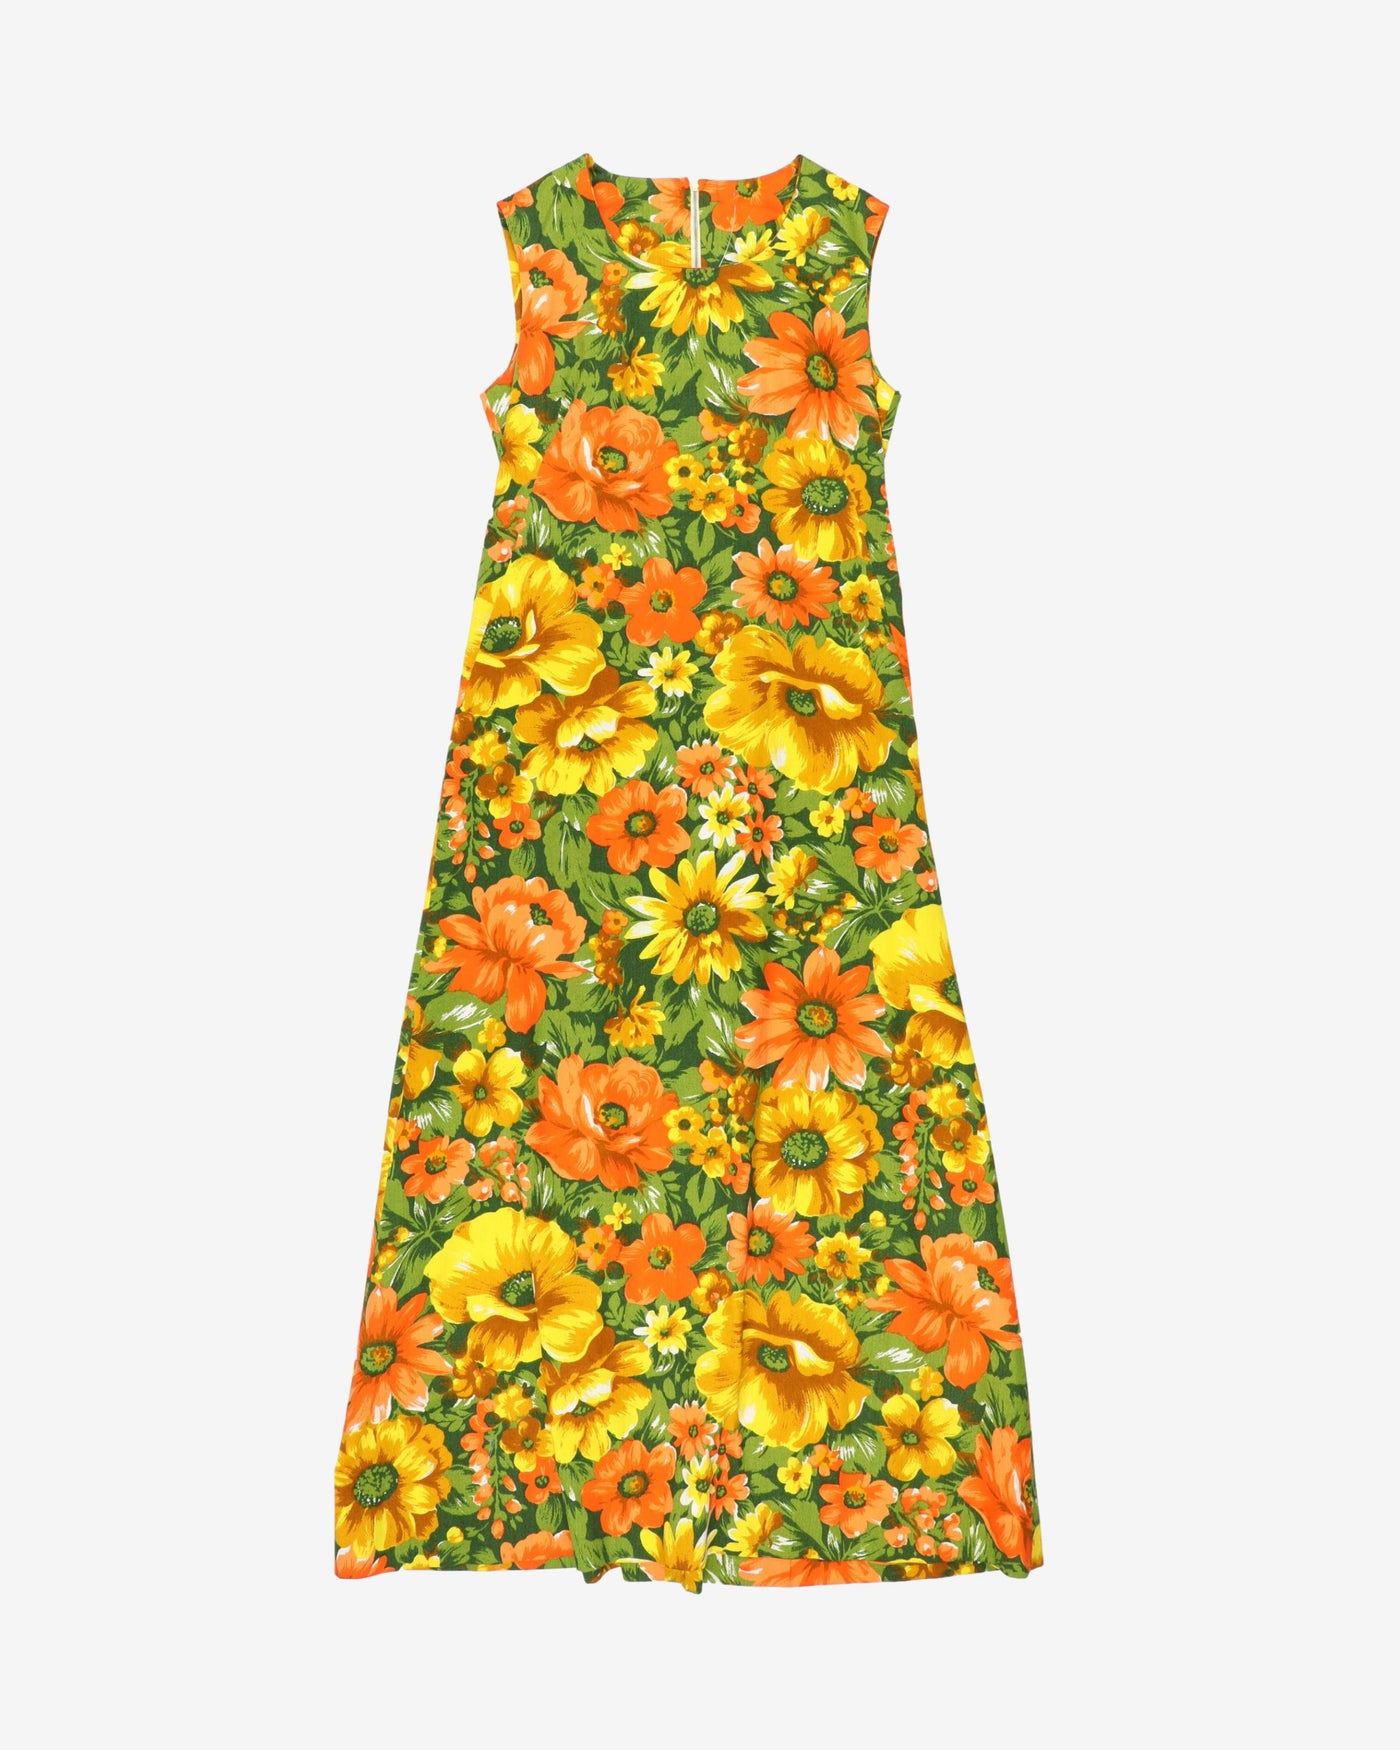 1970's orange and green floral dress - S